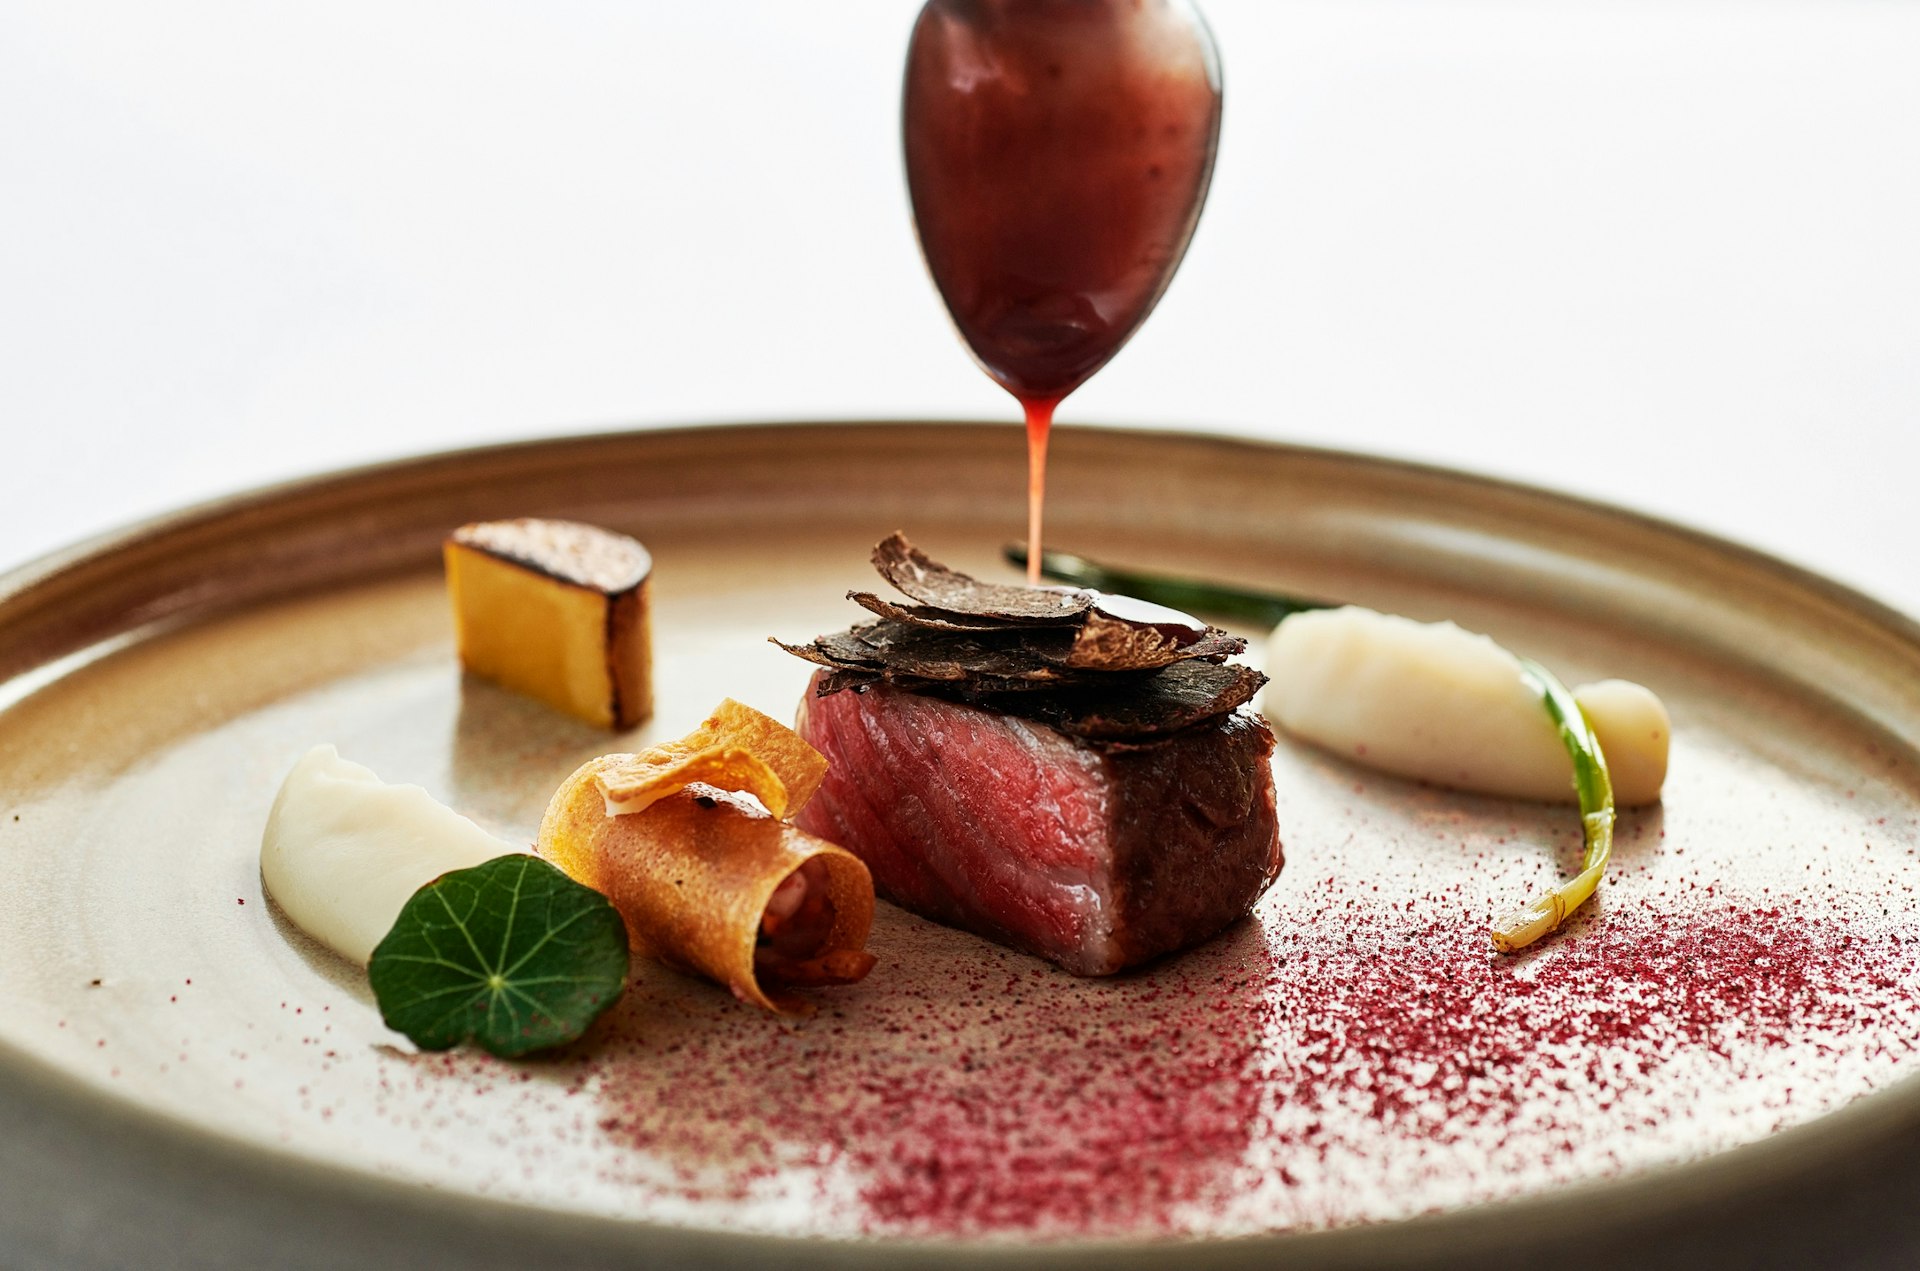 A spoon hovers over a small cube of red meat, with jus flowing down; next to the meat are delicate morsels of food (celeriac mash, rolled up crisp etc) and a sprinkle of purple dust.